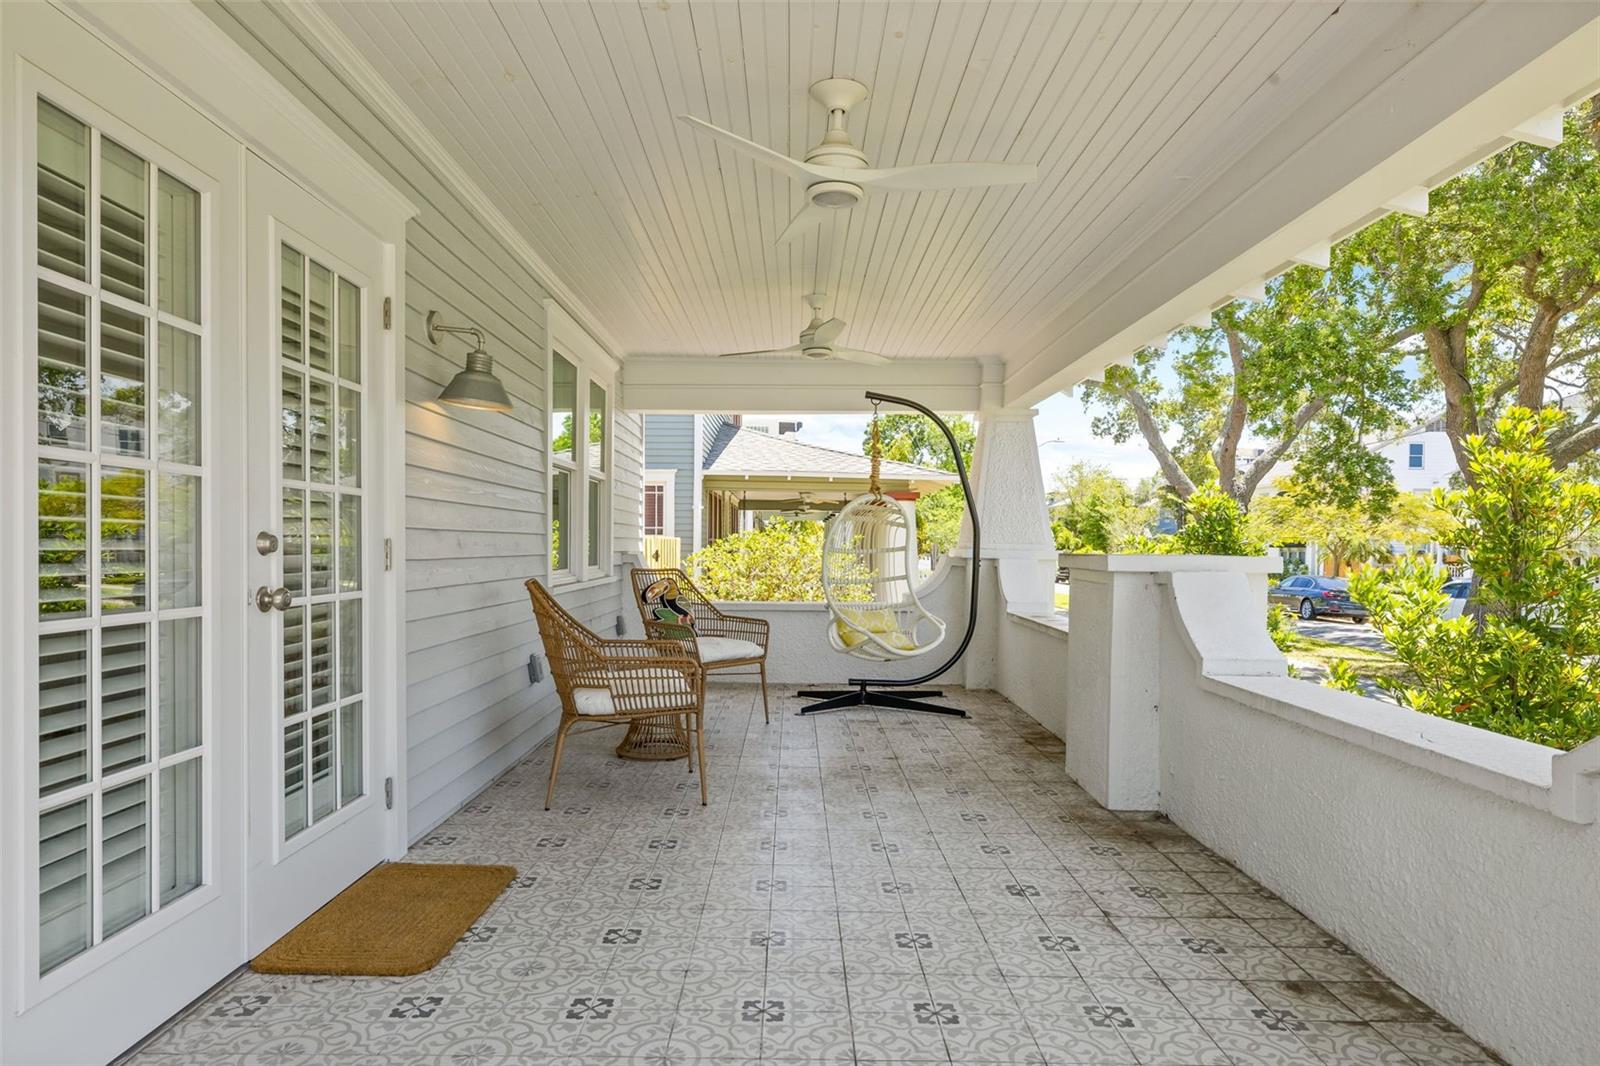 Charming front porch is the epitome of old NE style. Notice the gorgeous tile flooring and fans!